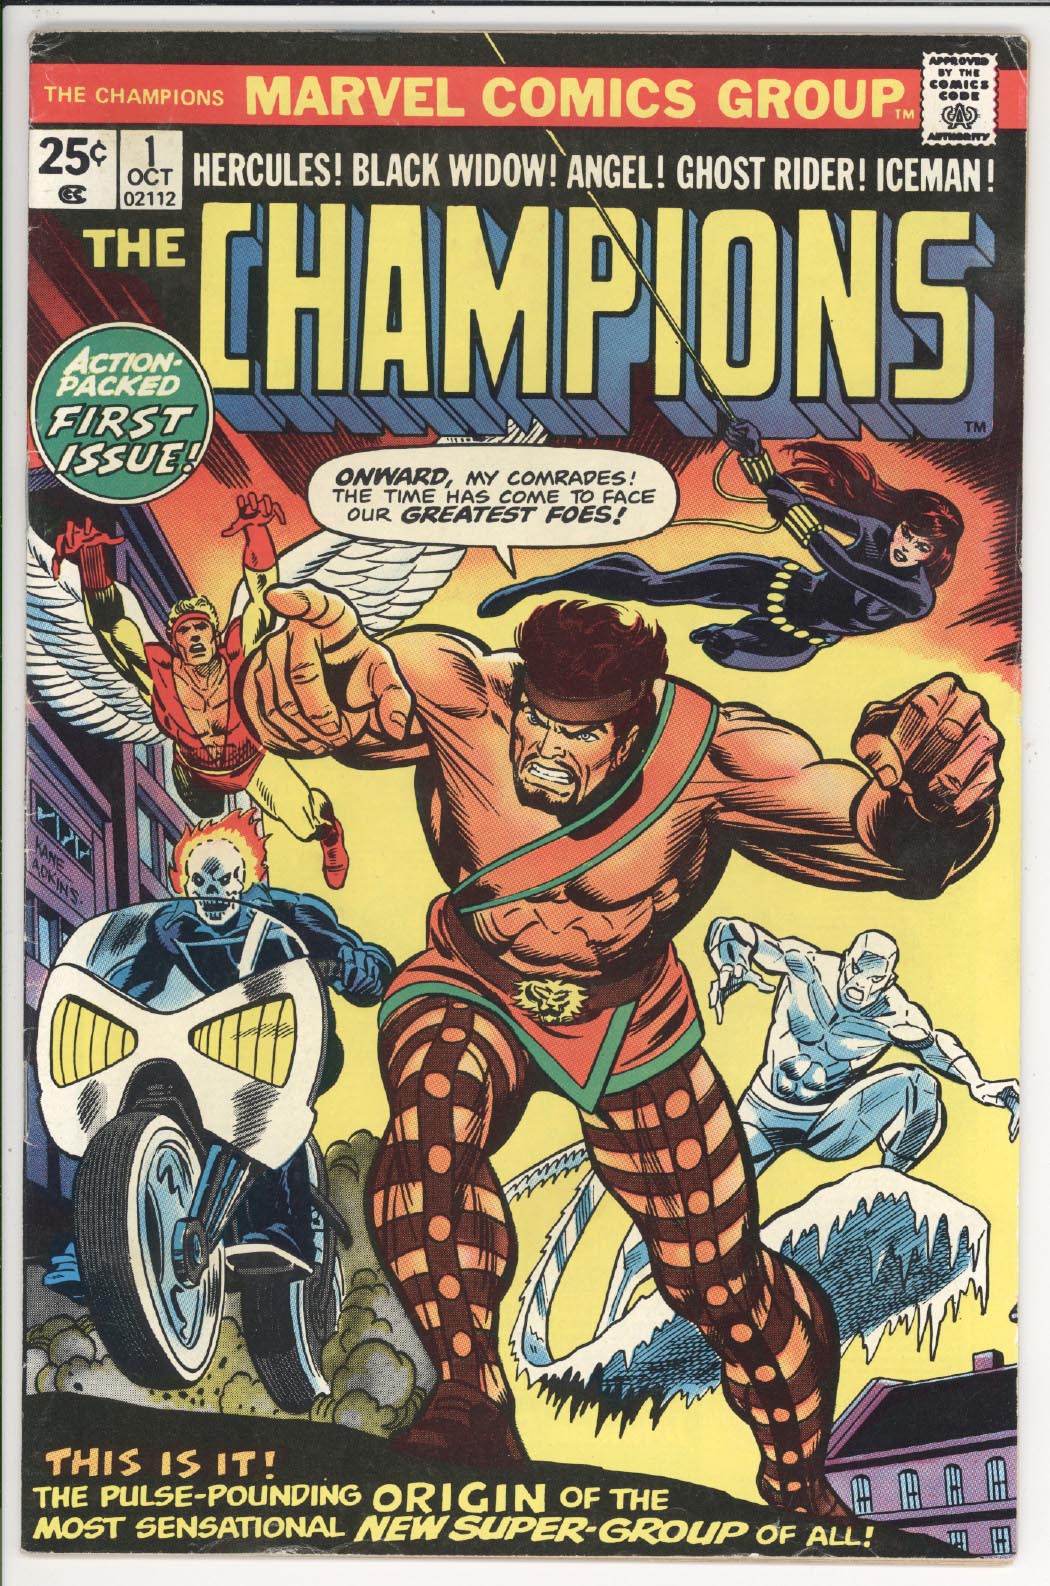 The Champions  #1 front